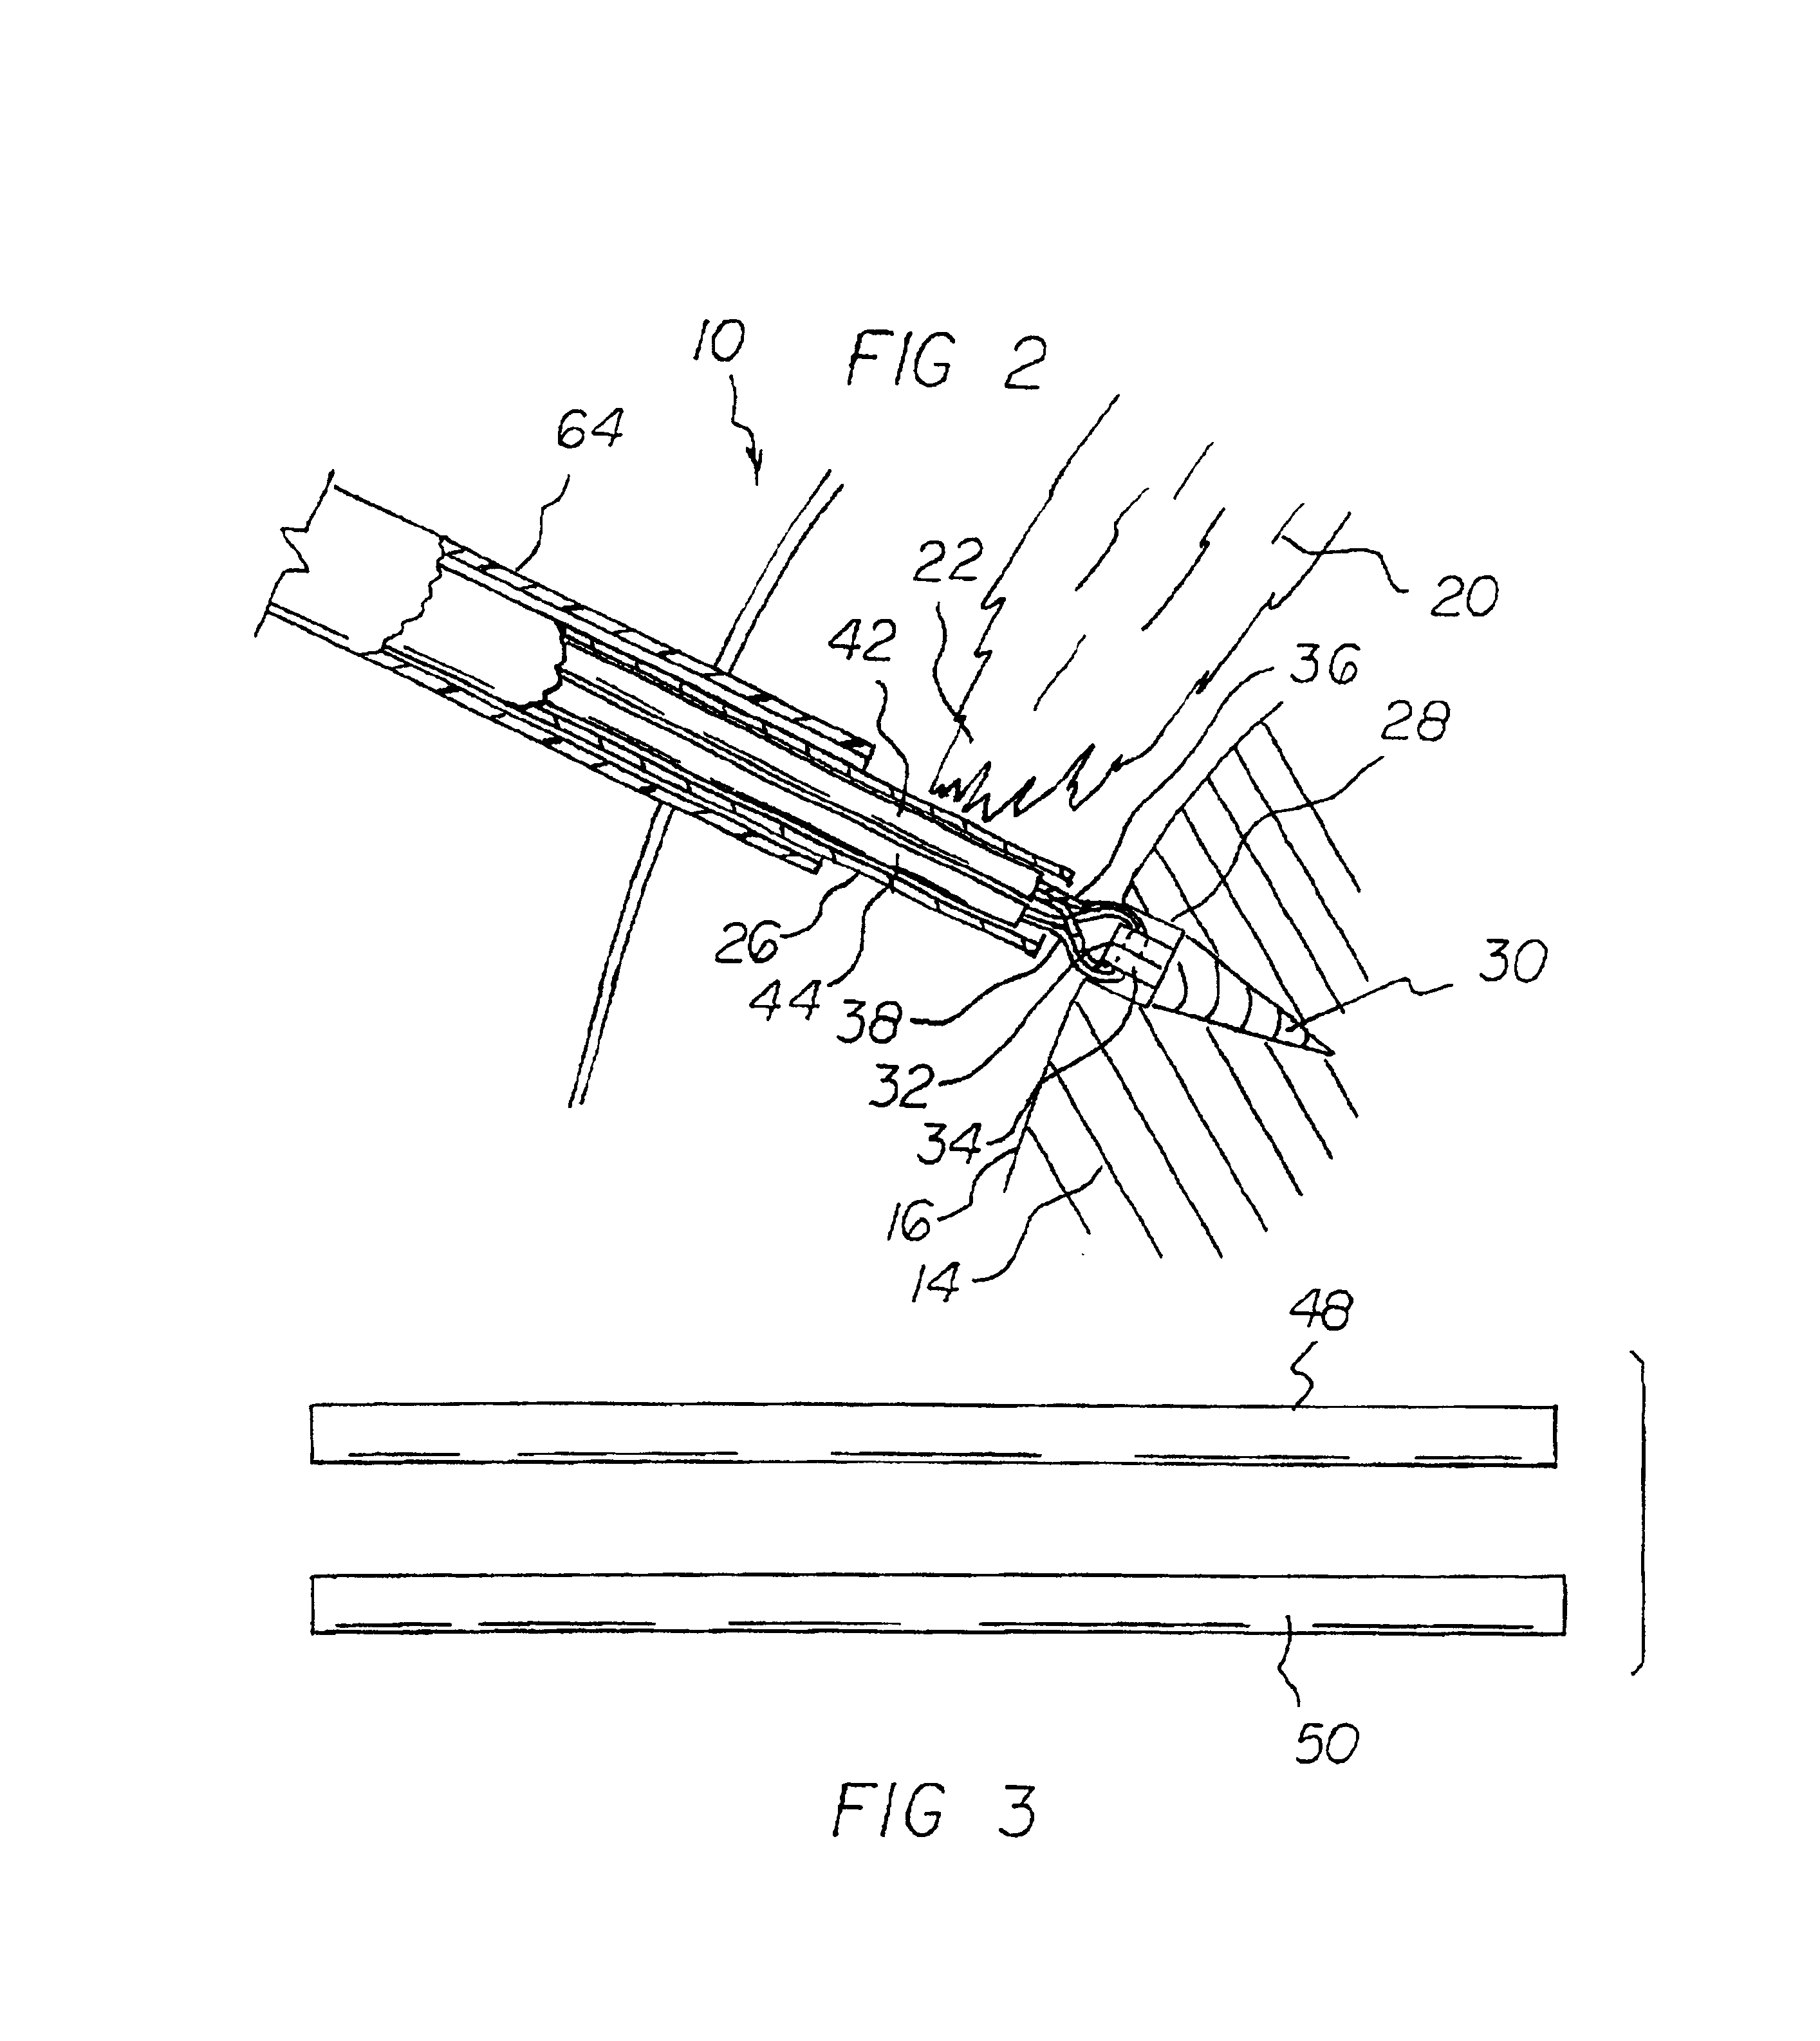 Suture management method and system